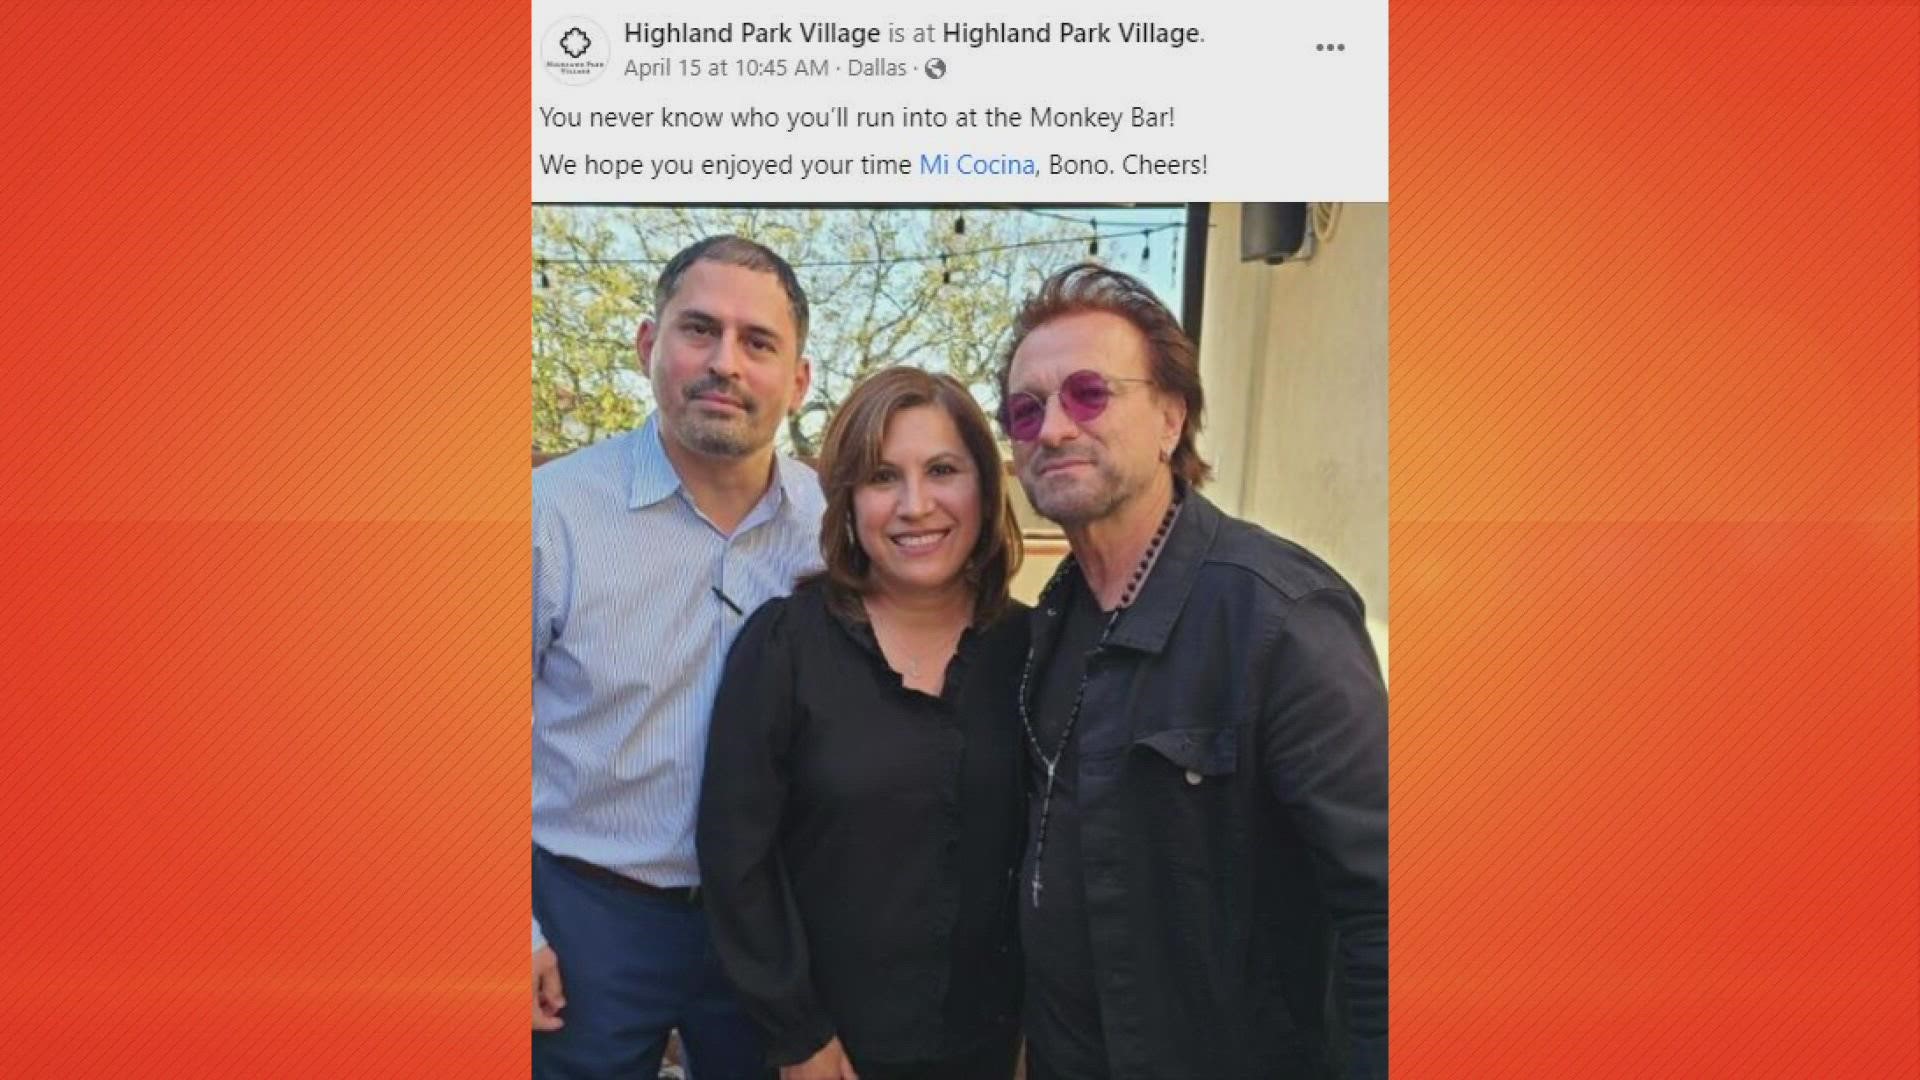 Upscale shopping and restaurant district Highland Park Village shared to social media last week a photo that sure seemed worthy of a brag... unless... it wasn't?